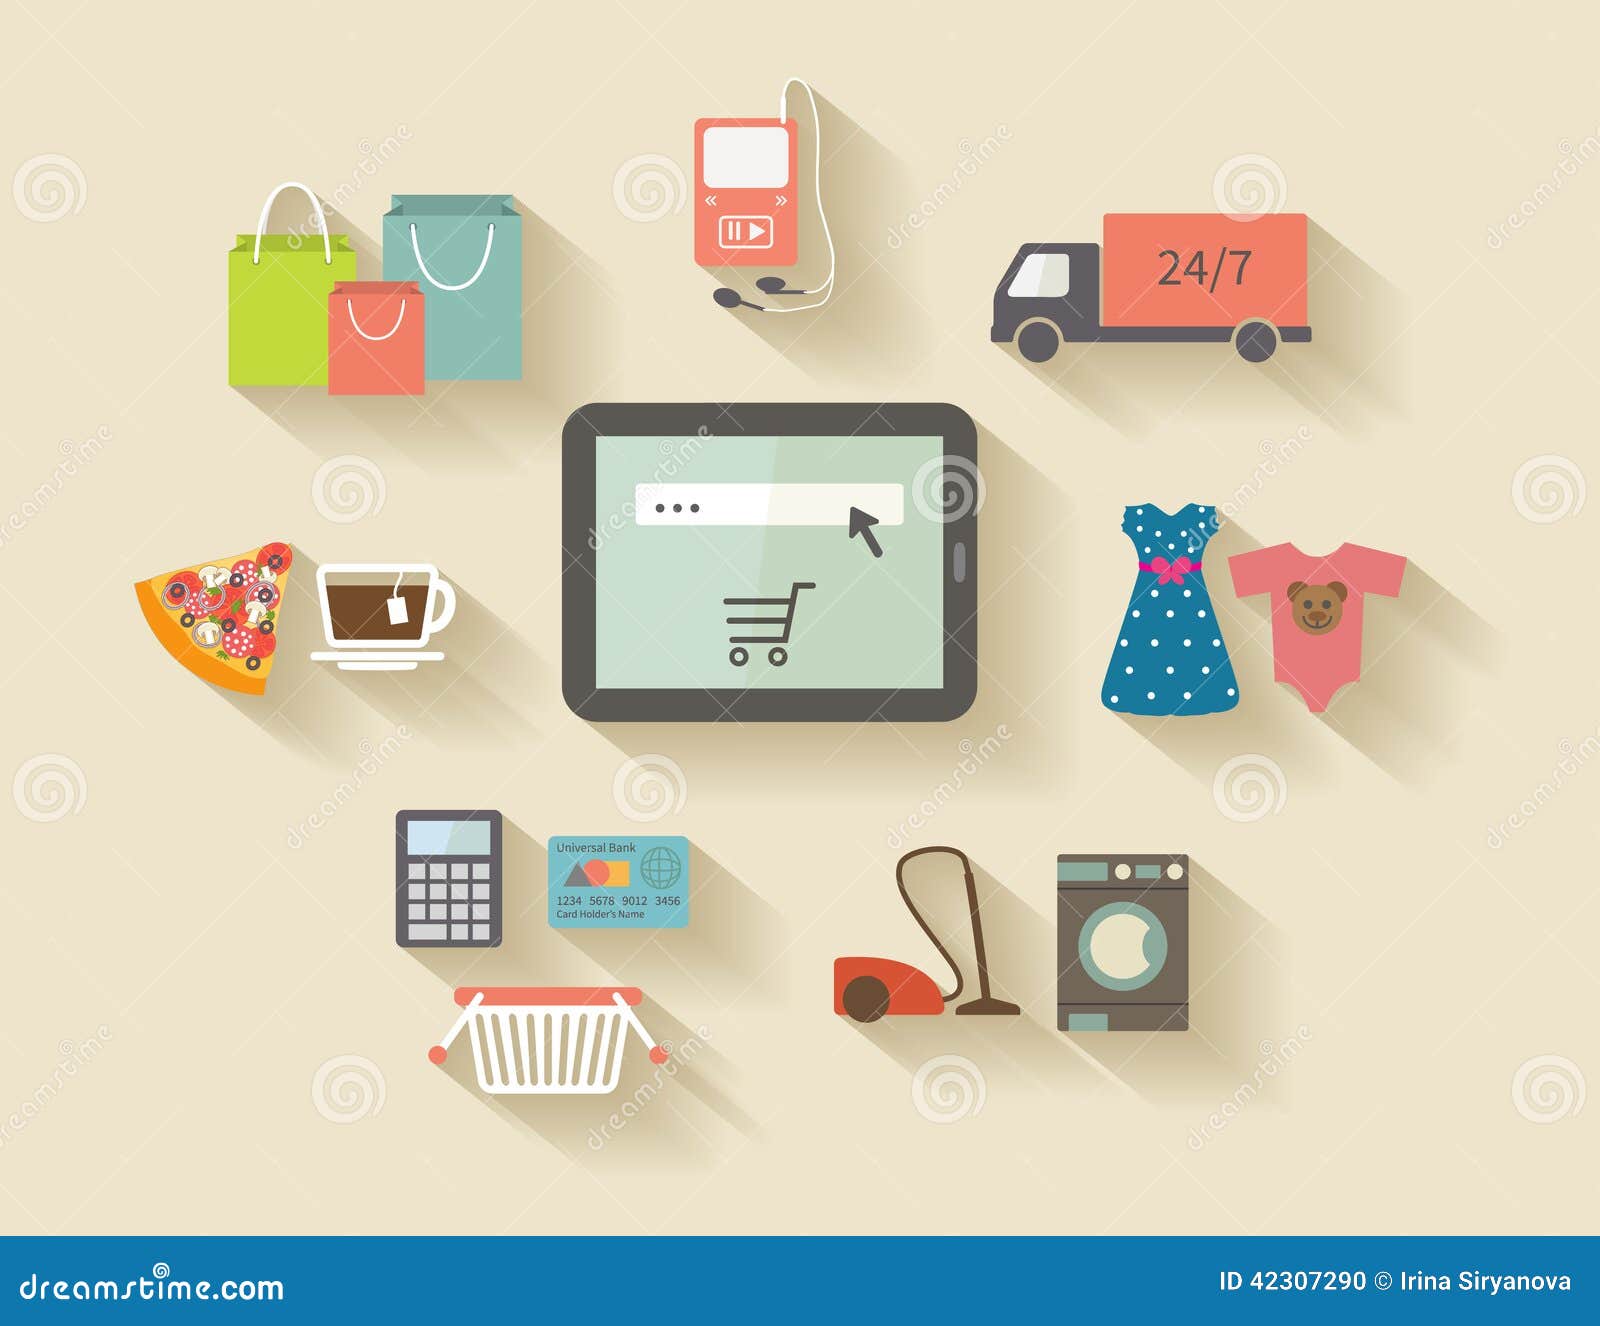 internet-shopping-e-commerce-concept-icons-set-elements-online-purchases-42307290